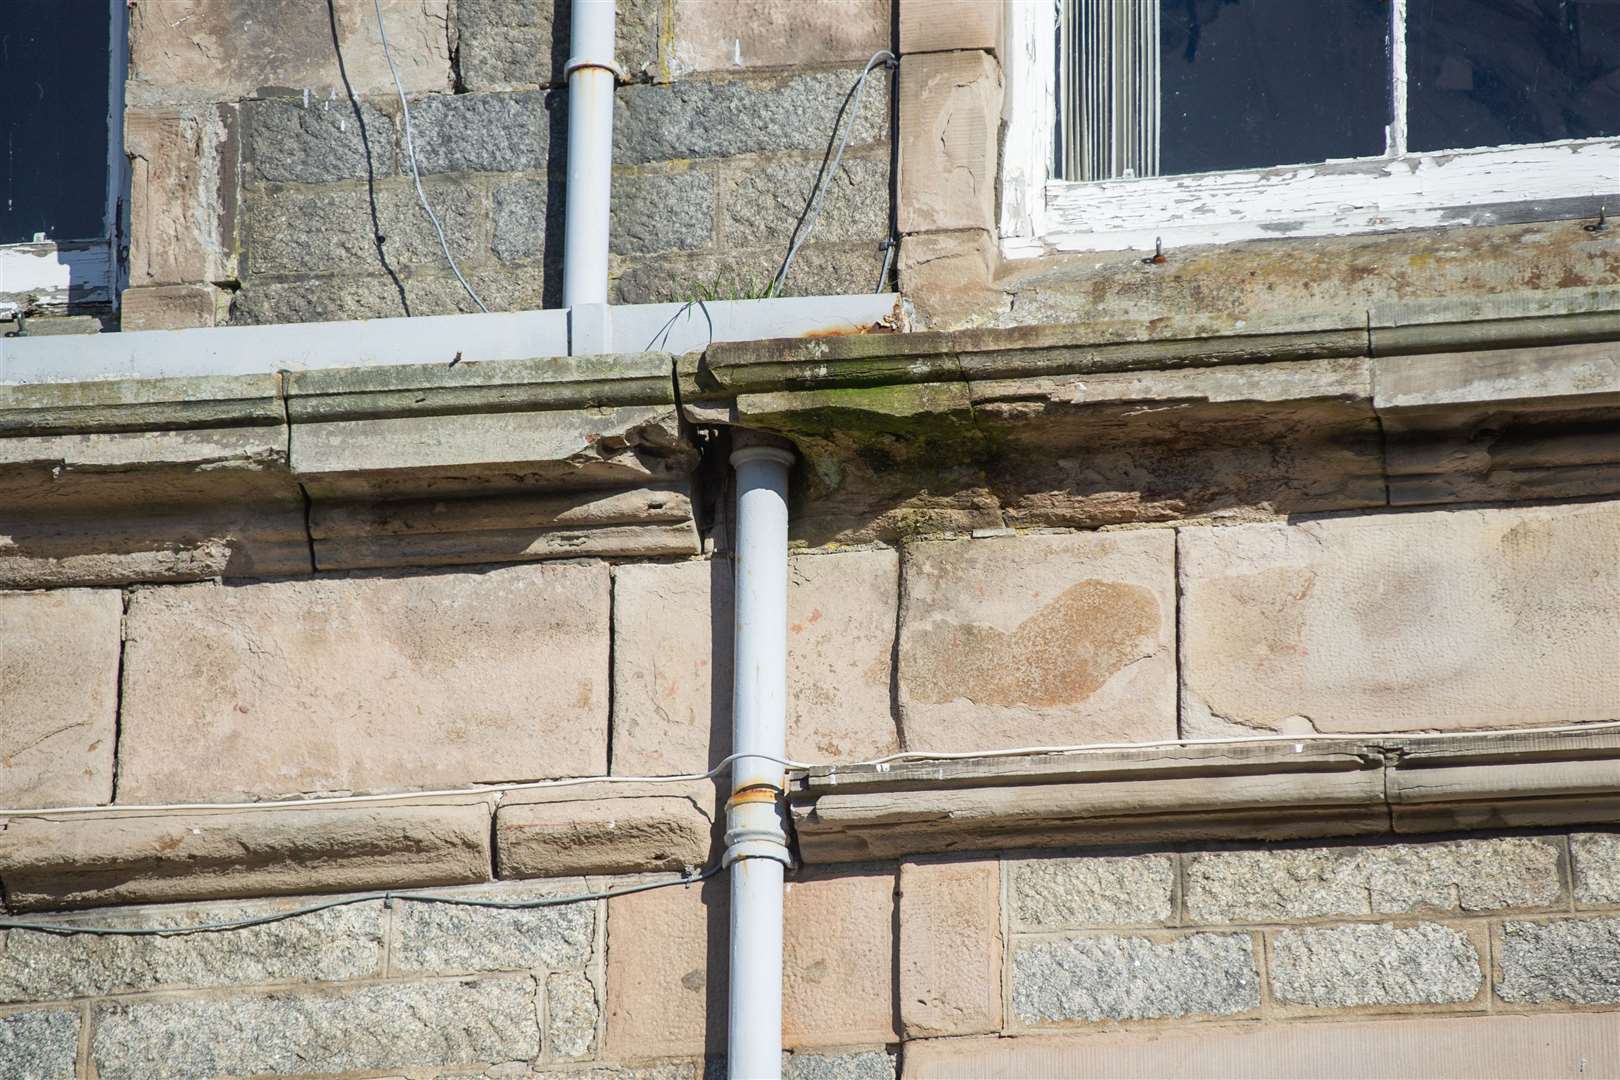 The Huntly Community Council raised an issue of dangerous buildings - especially the Huntly Hotel which has broken stonework, loose wires and vegetation growing out of it. ..Picture: Daniel Forsyth..